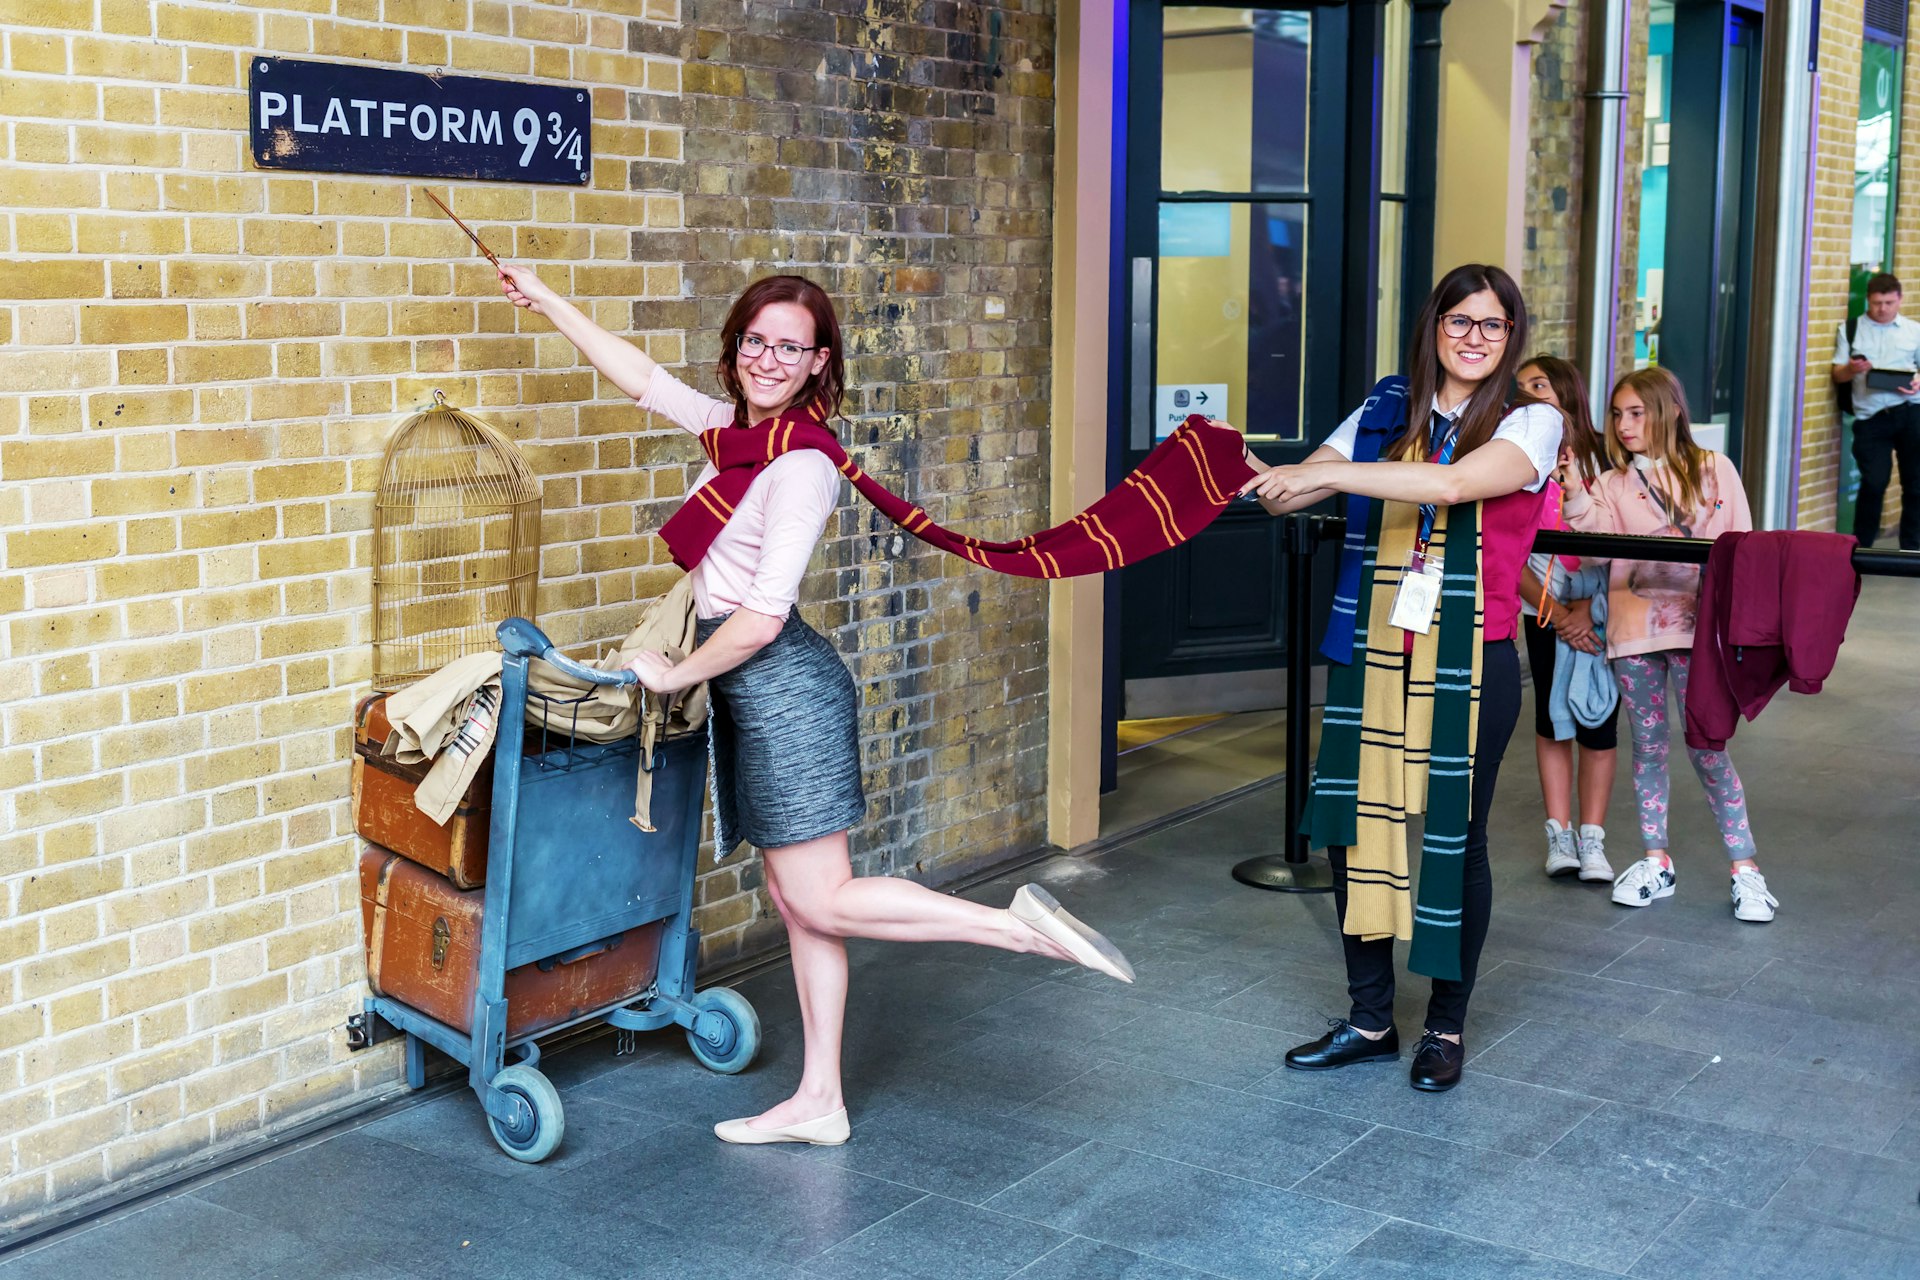 A woman pretends to walk through the wall of Platform 9¾ at King's Cross Station